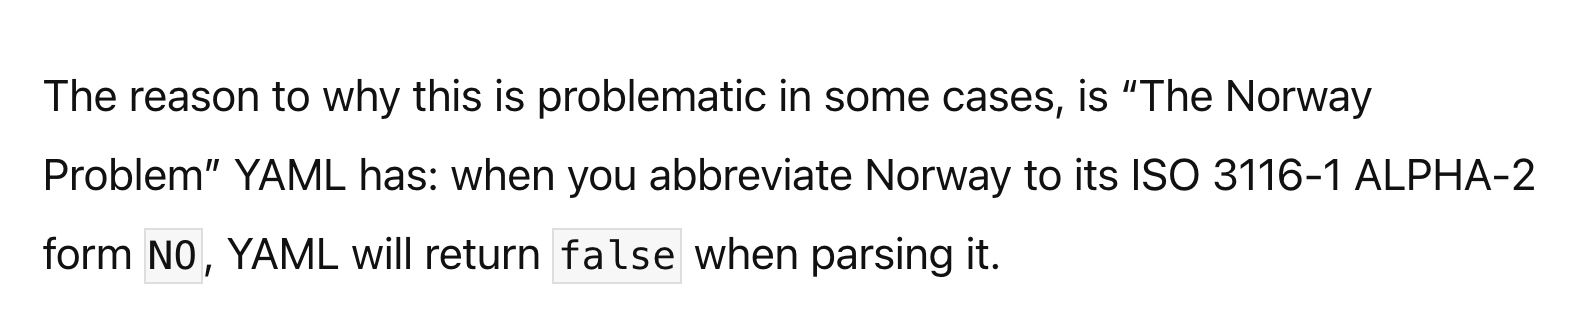 The reason to why this is problematic in some cases, is “The Norway Problem” YAML has: when you abbreviate Norway to its ISO 3116-1 ALPHA-2 form NO, YAML will return false when parsing it.